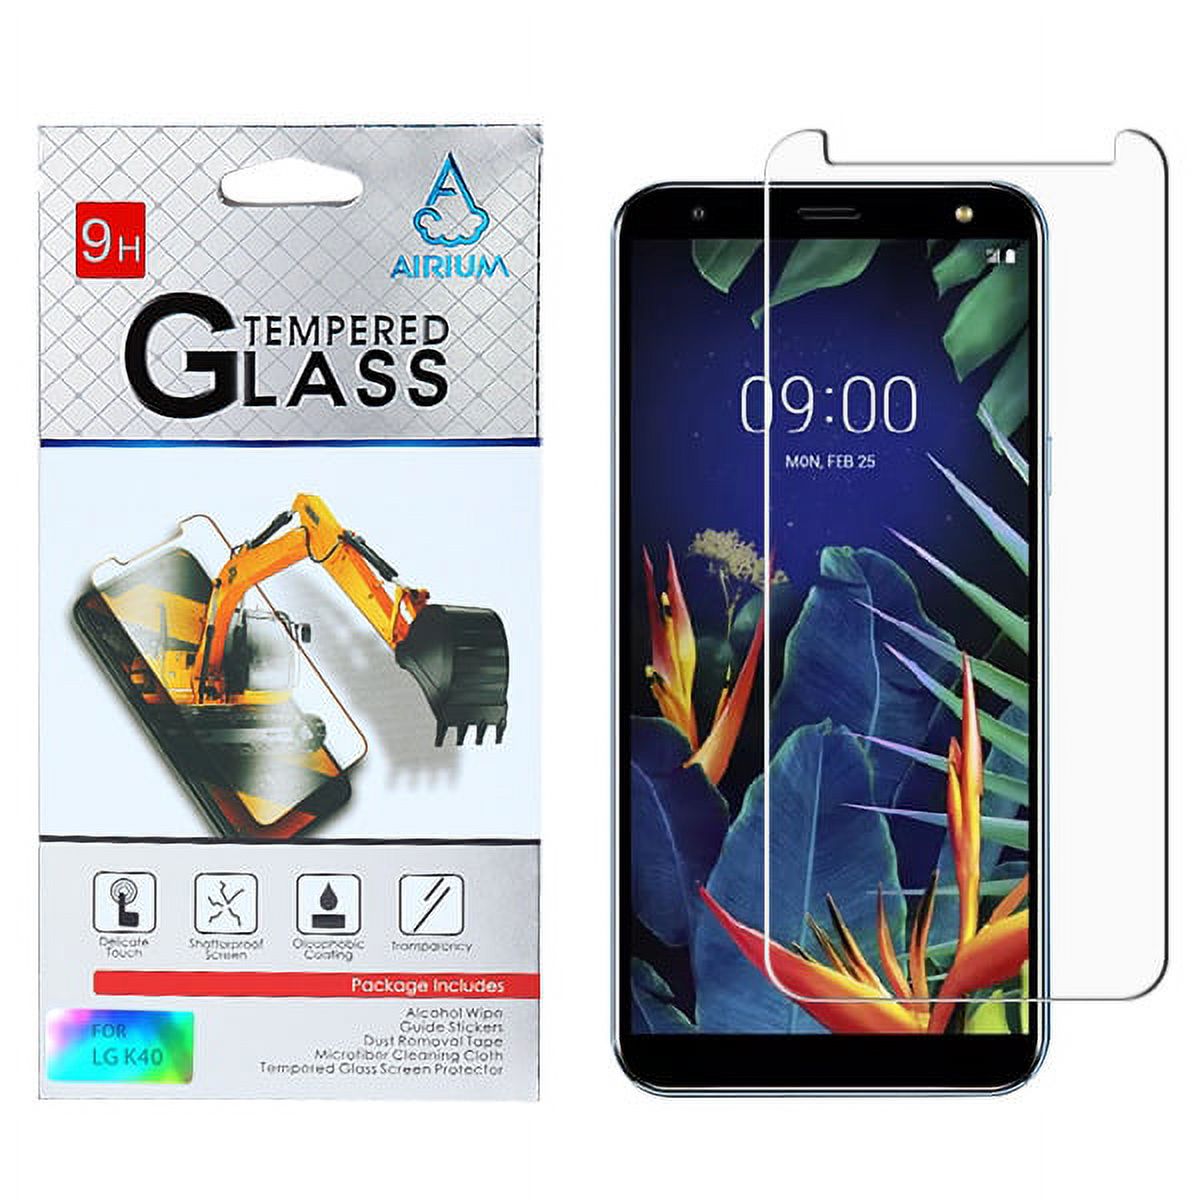 LG K40 Screen Protector Premium Tempered Glass 9H Hardness 2.5D [Super Easy Apply] HD Clarity Premium 3D Durable Tempered Glass LCD Screen Protector Guard for LG K40 (2019) - image 1 of 6